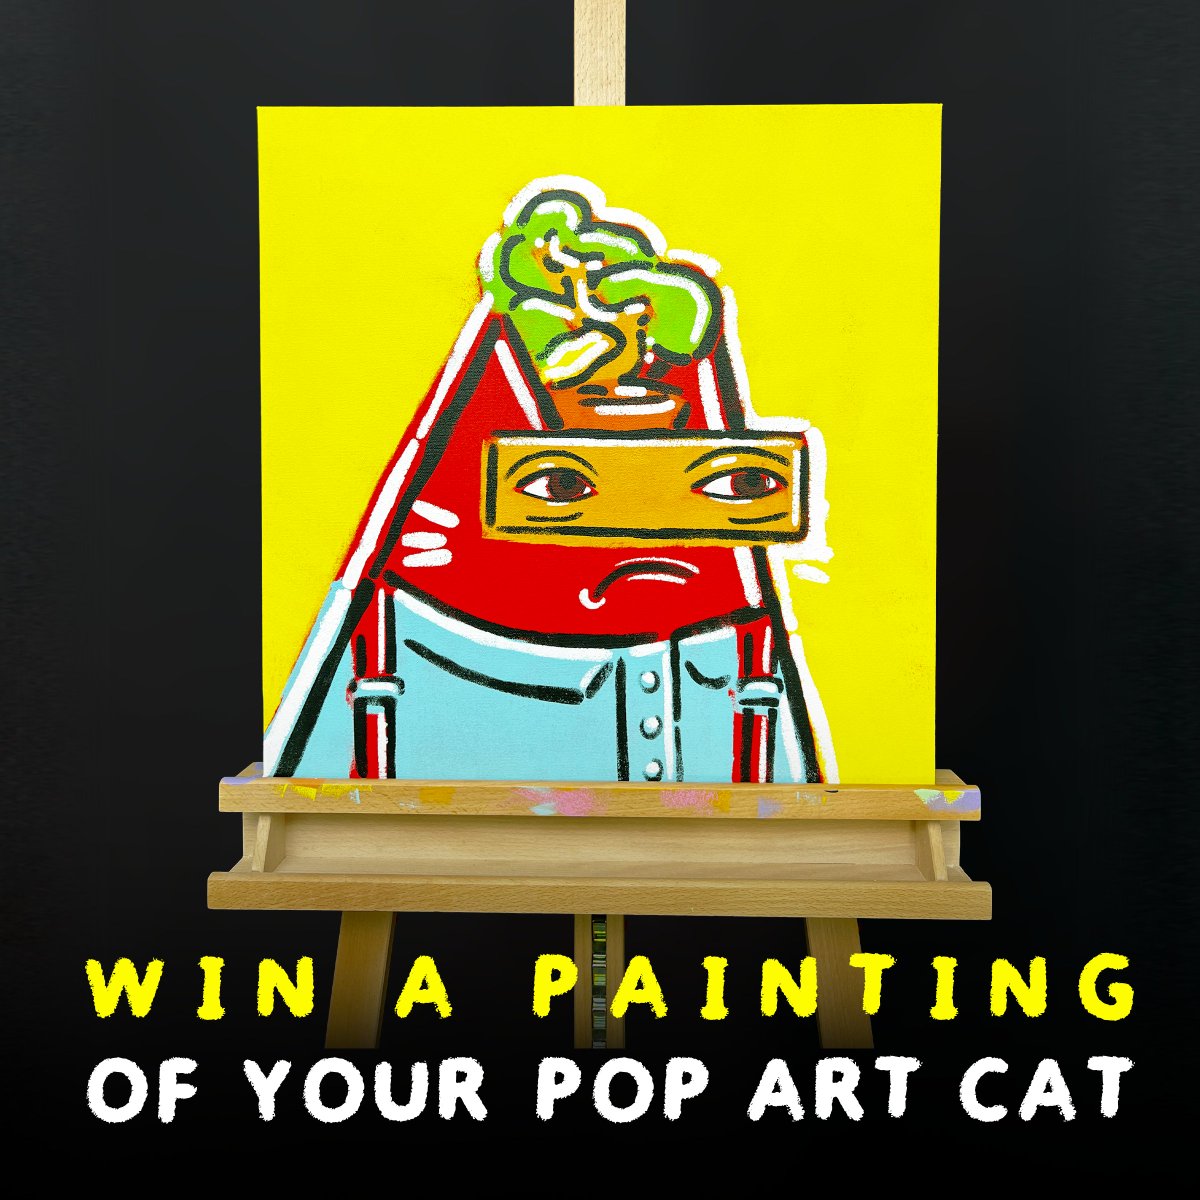 GIVEAWAY!!! Every week, @mattchessco paints a lucky holder's Pop Art Cat. To enter: Like, RT, Follow us, Post an image of your Pop Art Cat in the comments. Announcing the winner in ∼24 hours. Tune in to Matt's livestream on Sunday at 7pm EST.